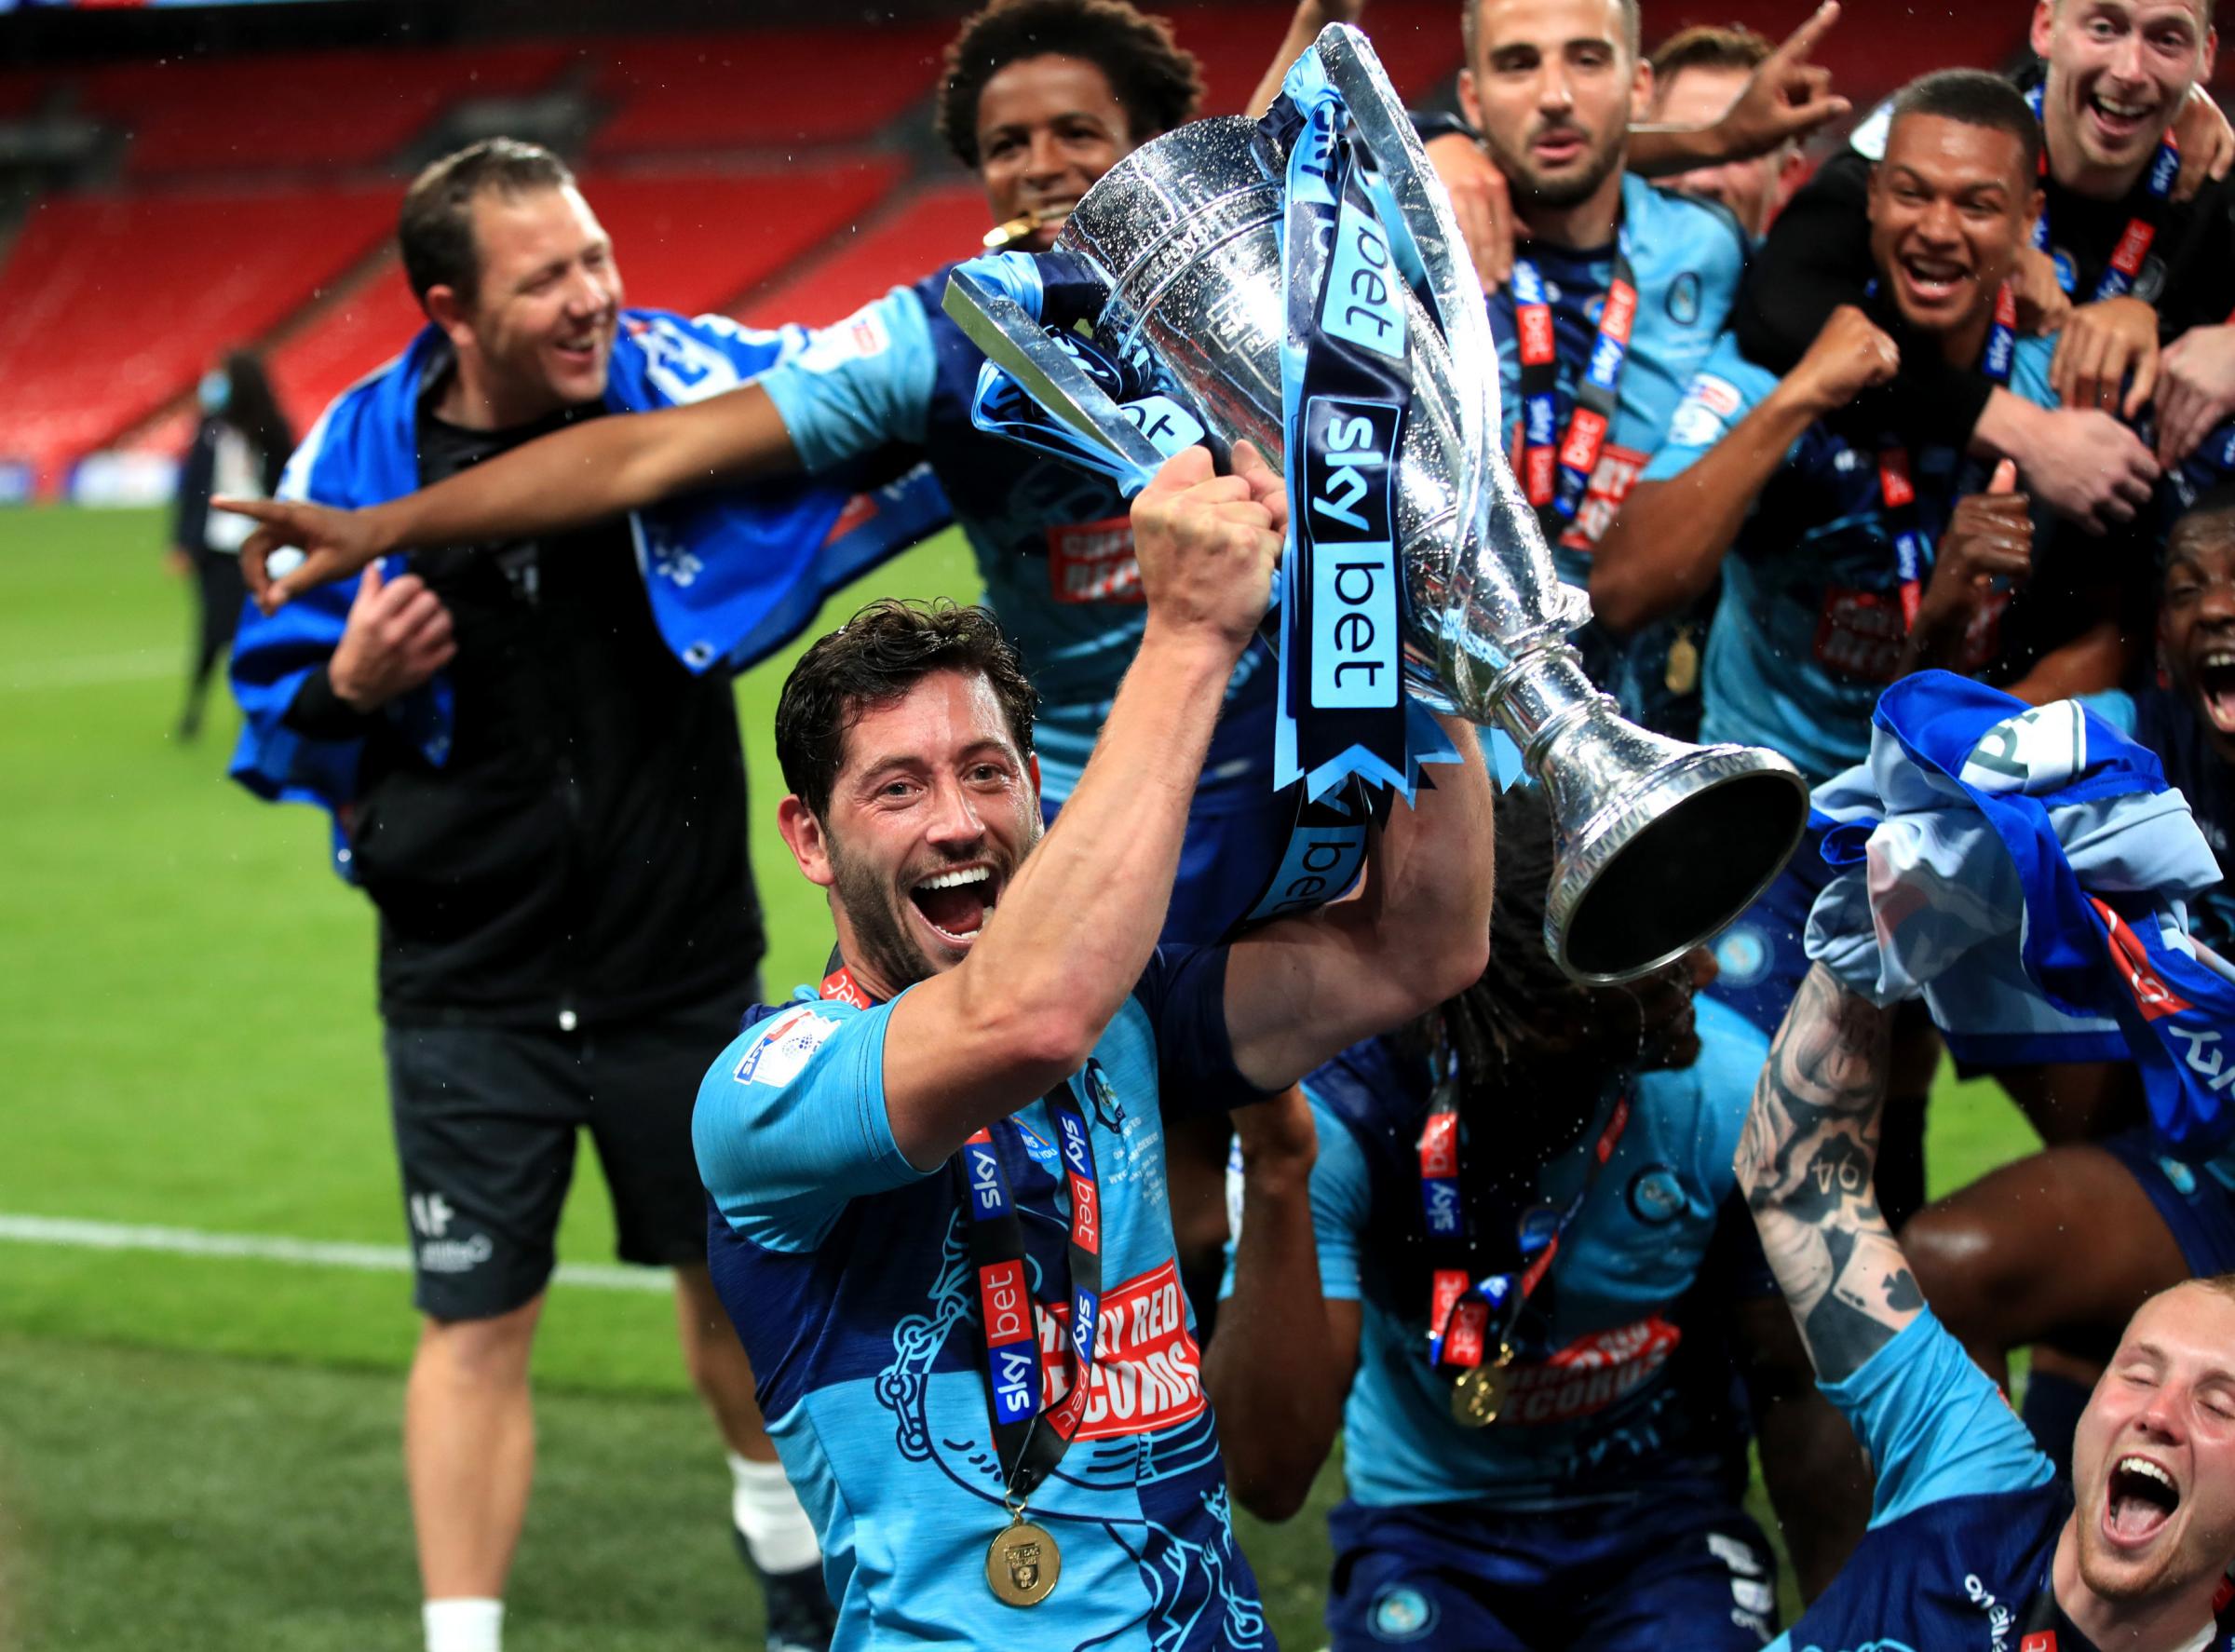 Wycombe achieved promotion to the Championship on July 13, 2020, when they defeated Oxford United 2-1 at Wembley (PA)